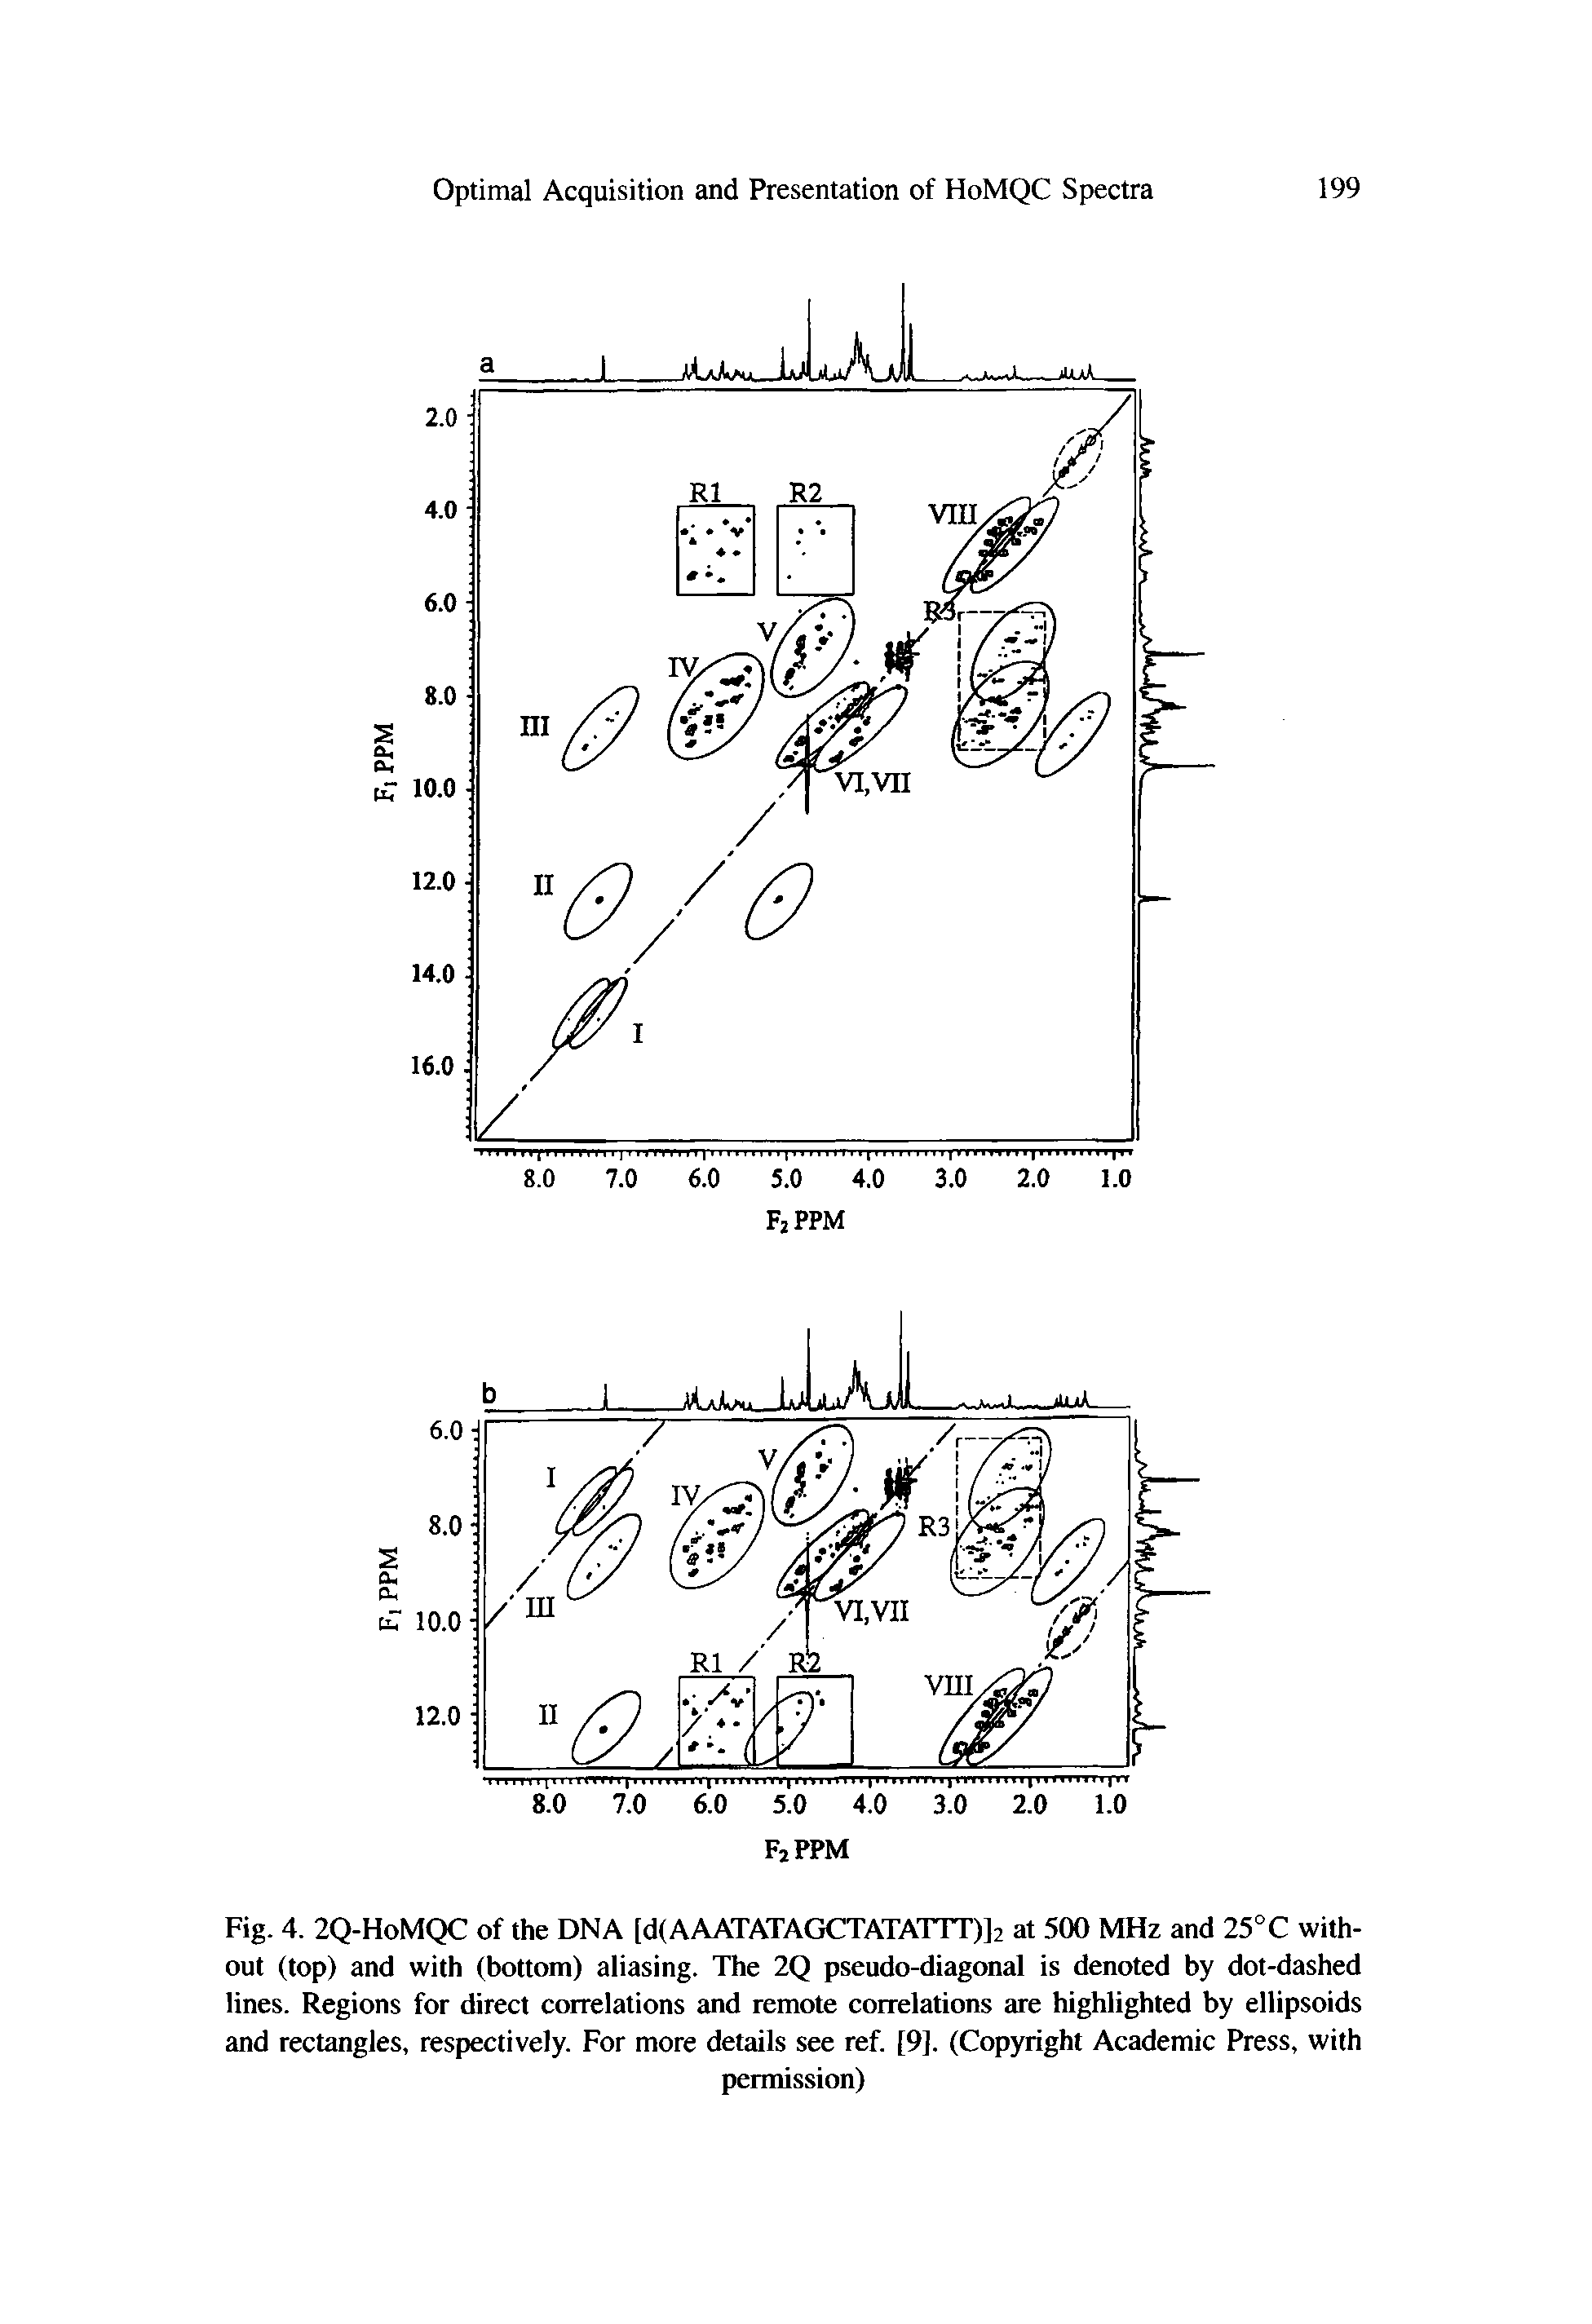 Fig. 4. 2Q-HoMQC of the DNA [d(AAATATAGCTATATTT)]2 at 500 MHz and 25°C without (top) and with (bottom) aliasing. The 2Q pseudo-diagonal is denoted by dot-dashed lines. Regions for direct correlations and remote correlations are highlighted by ellipsoids and rectangles, respectively. For more details see ref. [9]. (Copyright Academic Press, with...